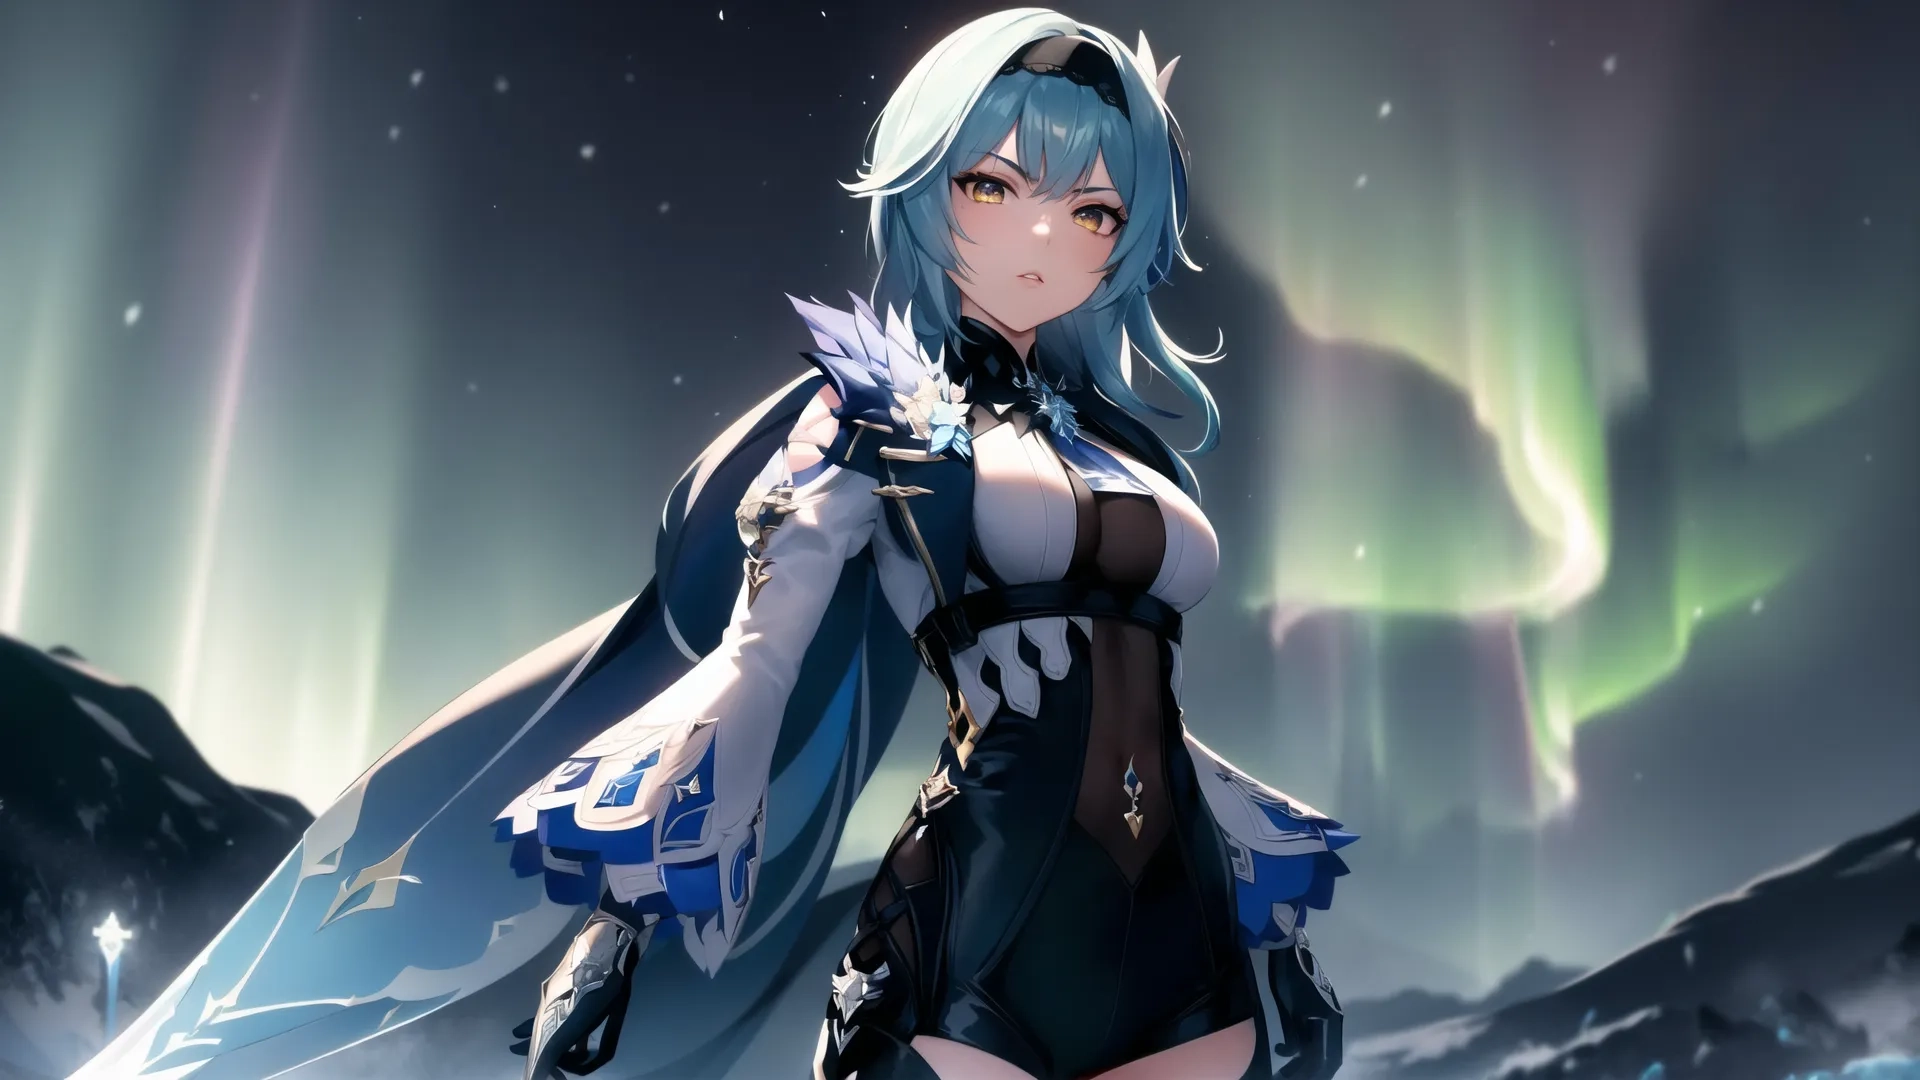 a very sexy anime girl with blue hair and ice surrounding her body with aurora lights in the background and snow dust on ground in the foreground
